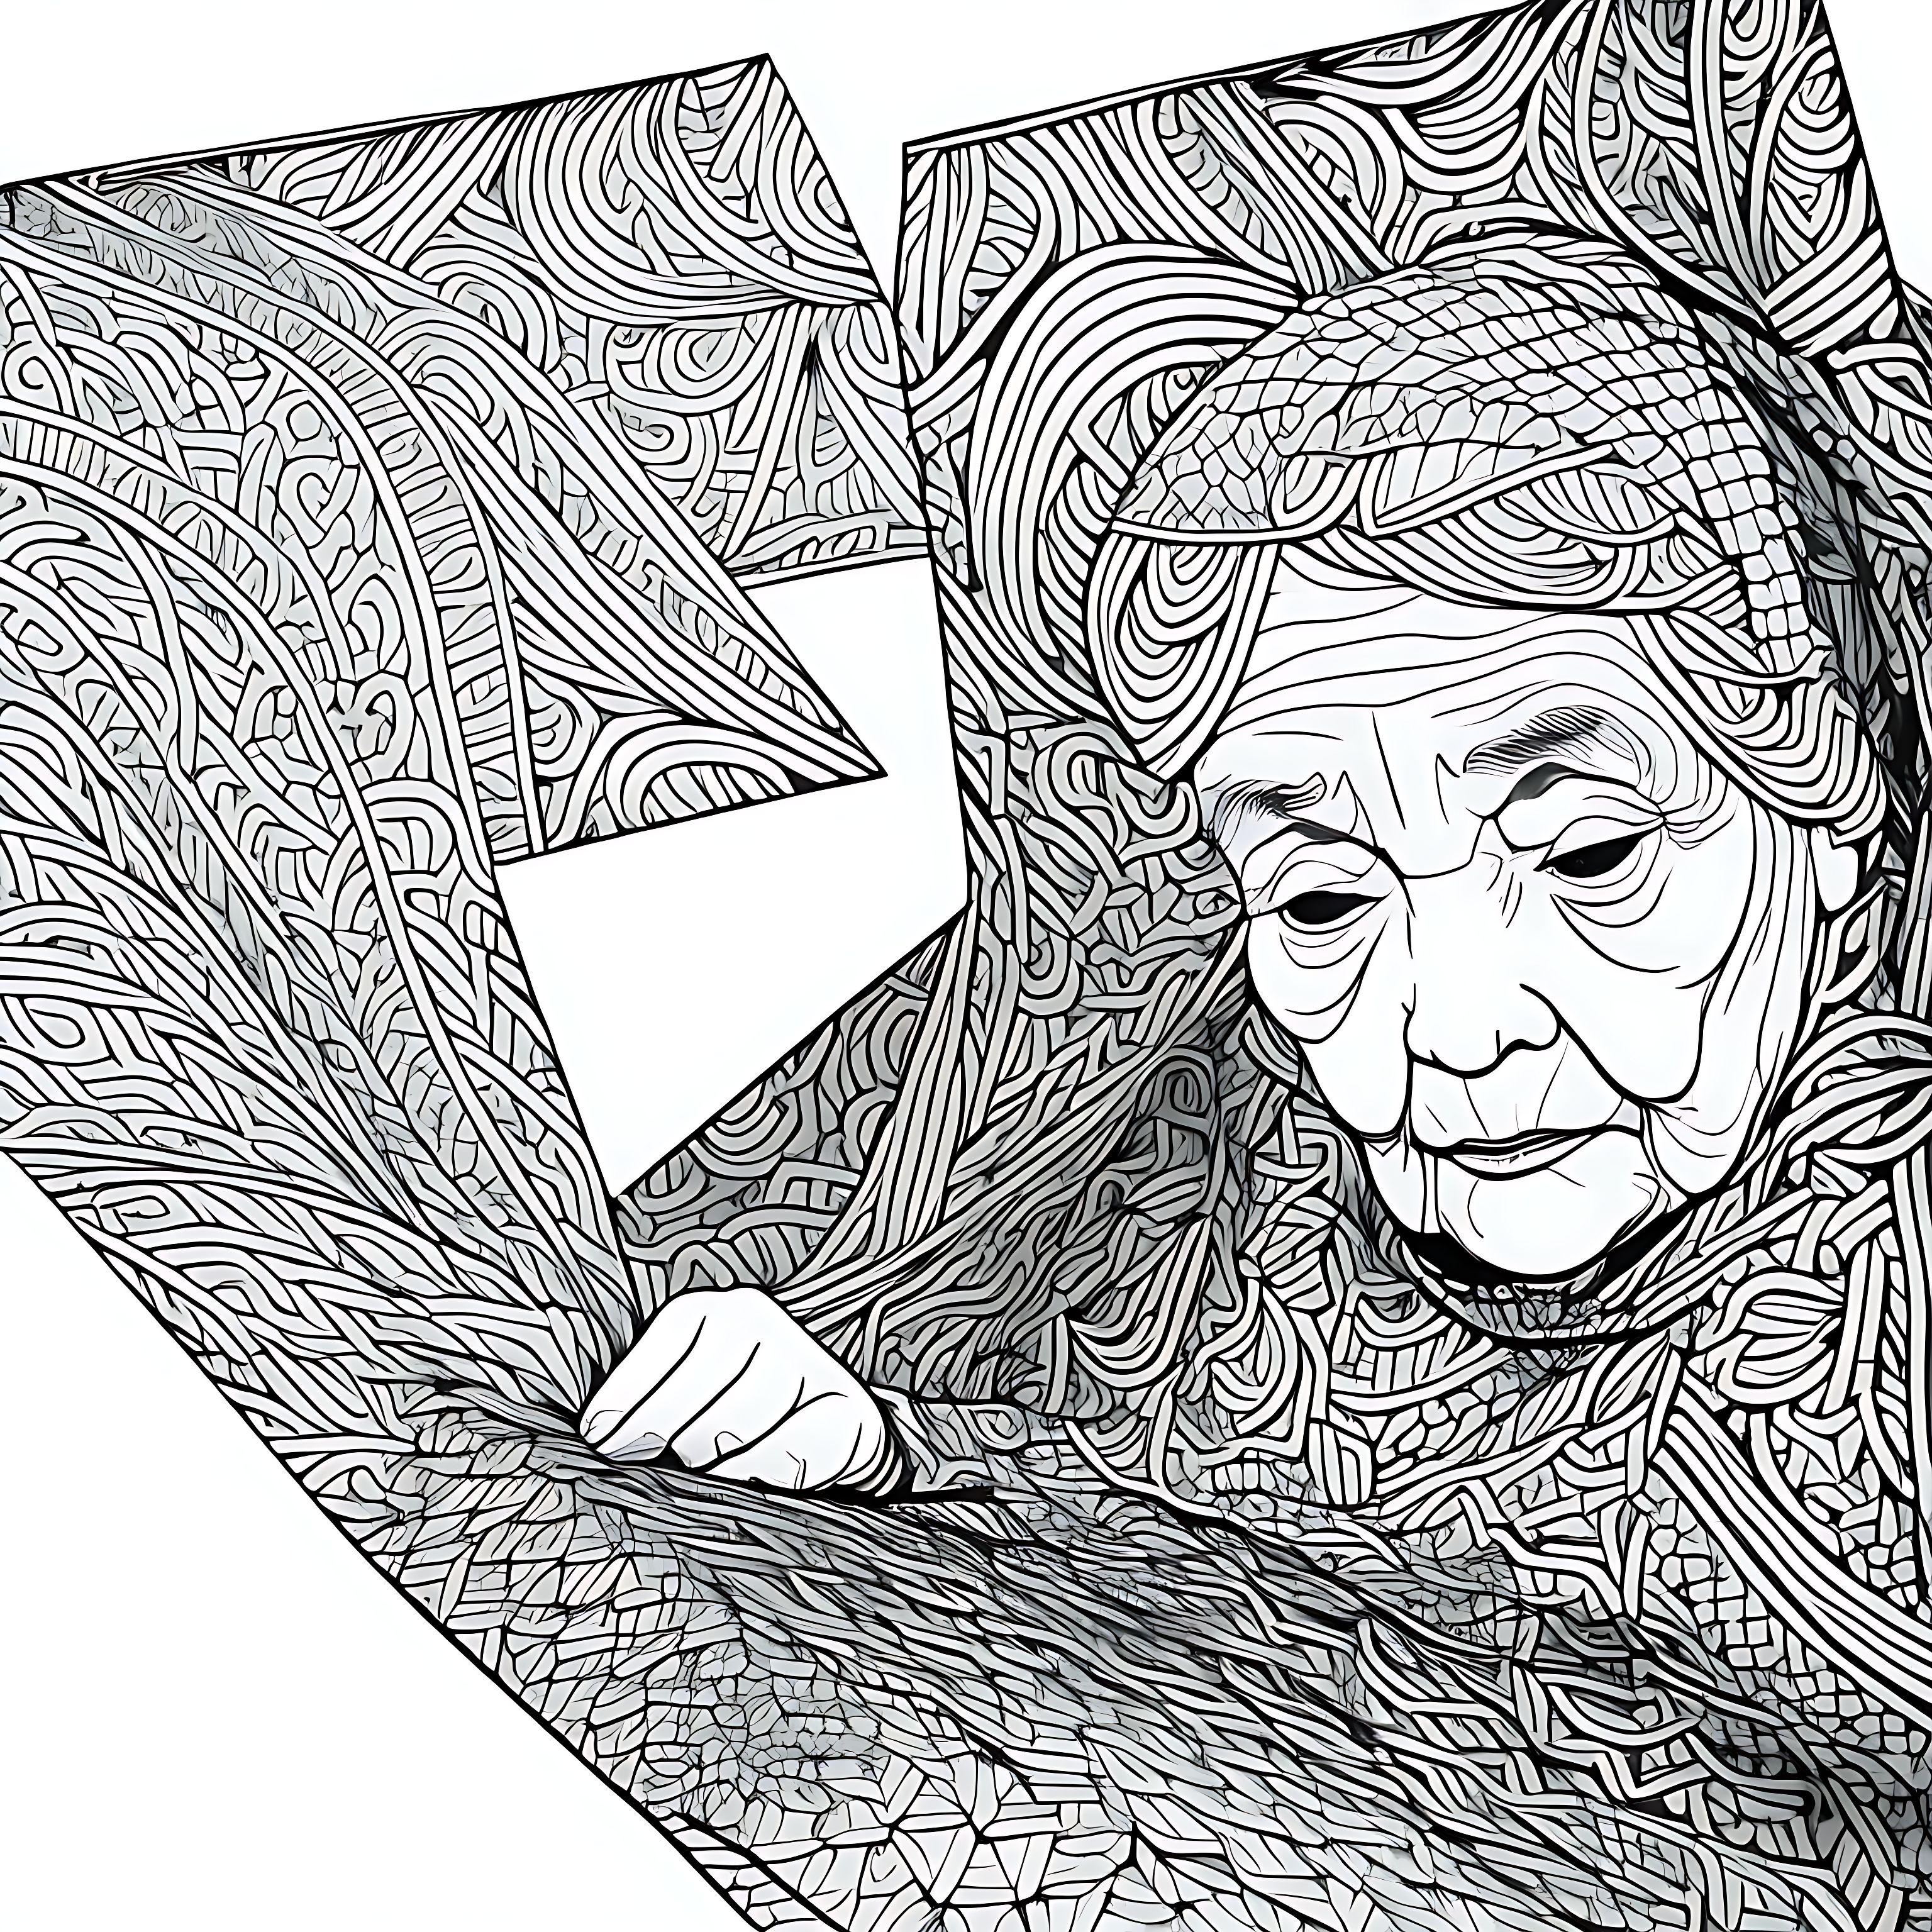 Mshare old woman is folding origami paper